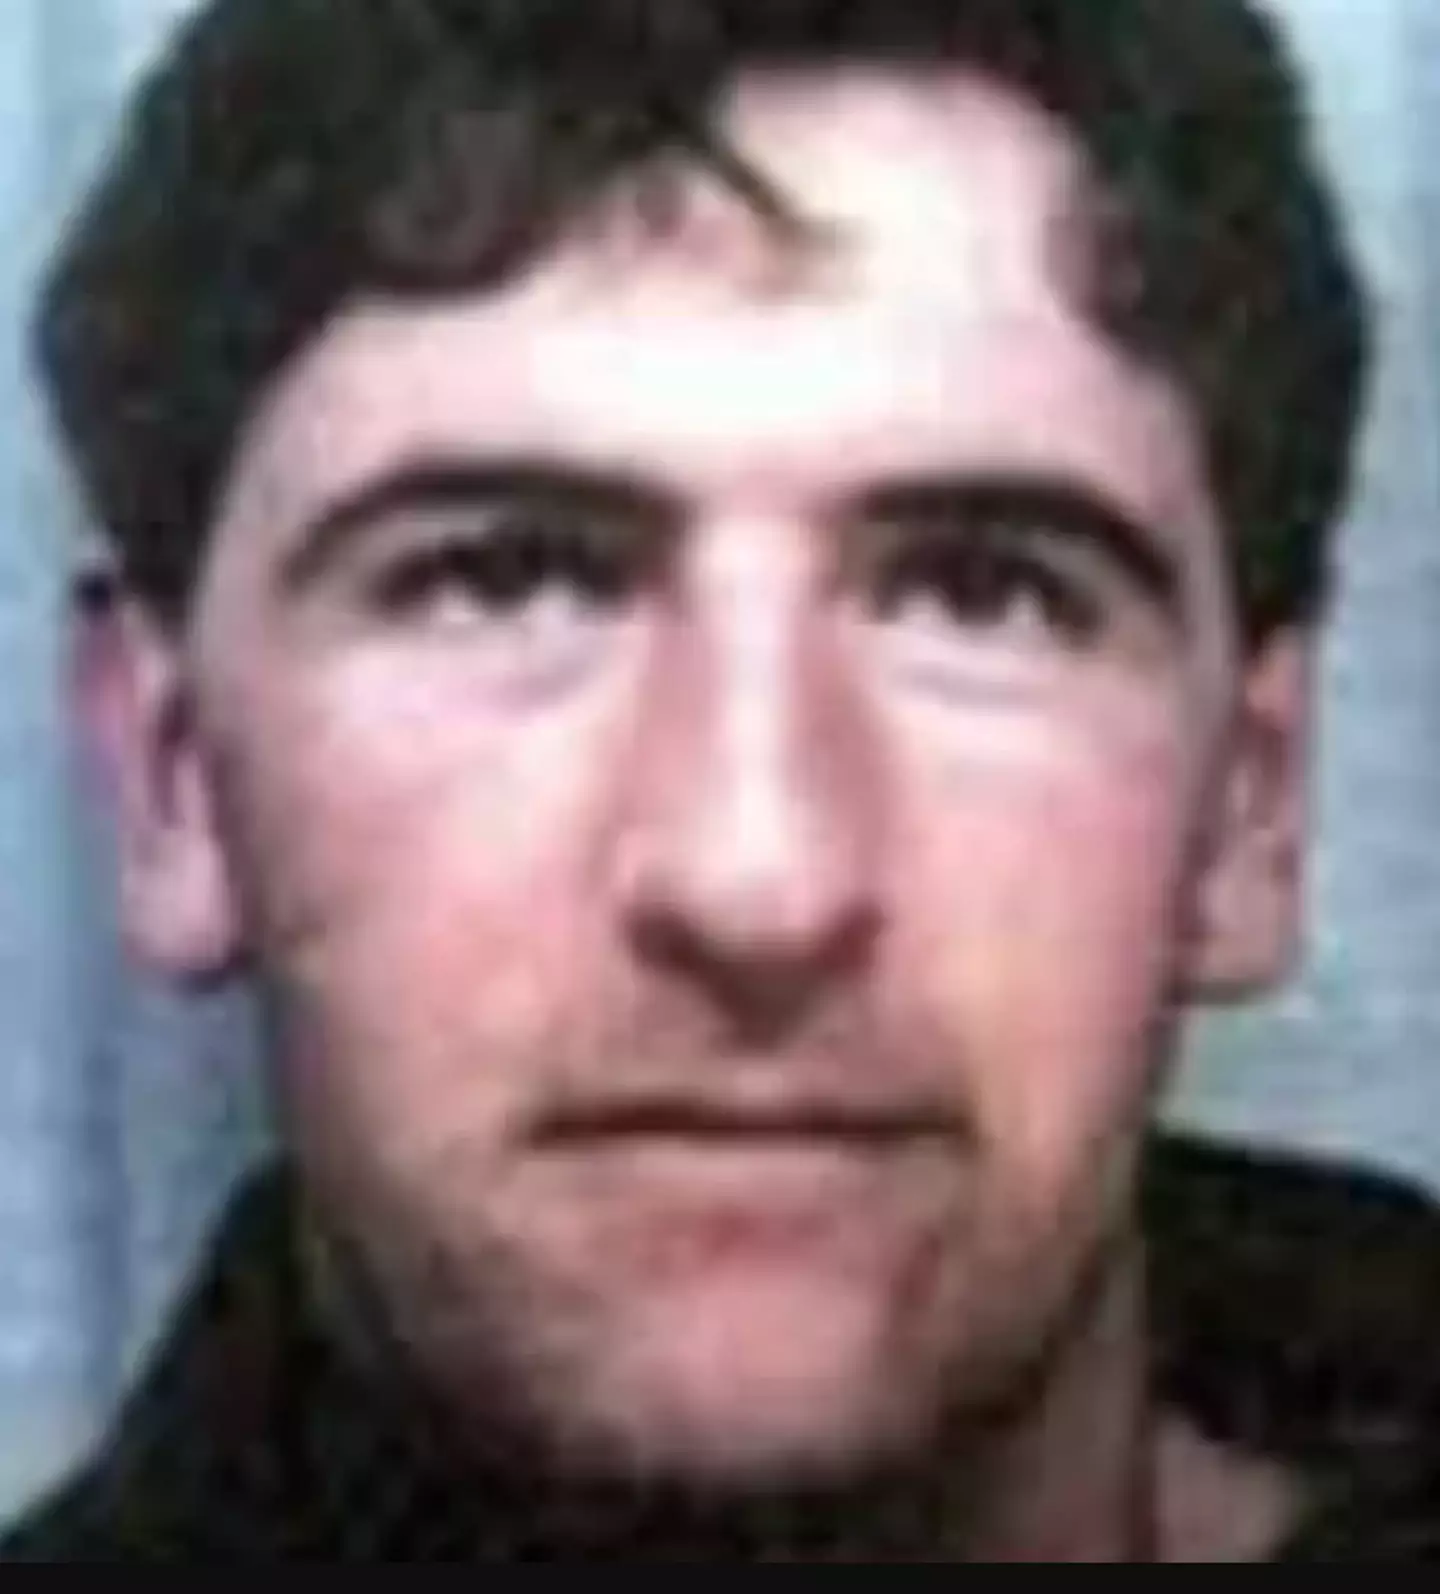 Peter McGuire vanished in 1993 aged 21.